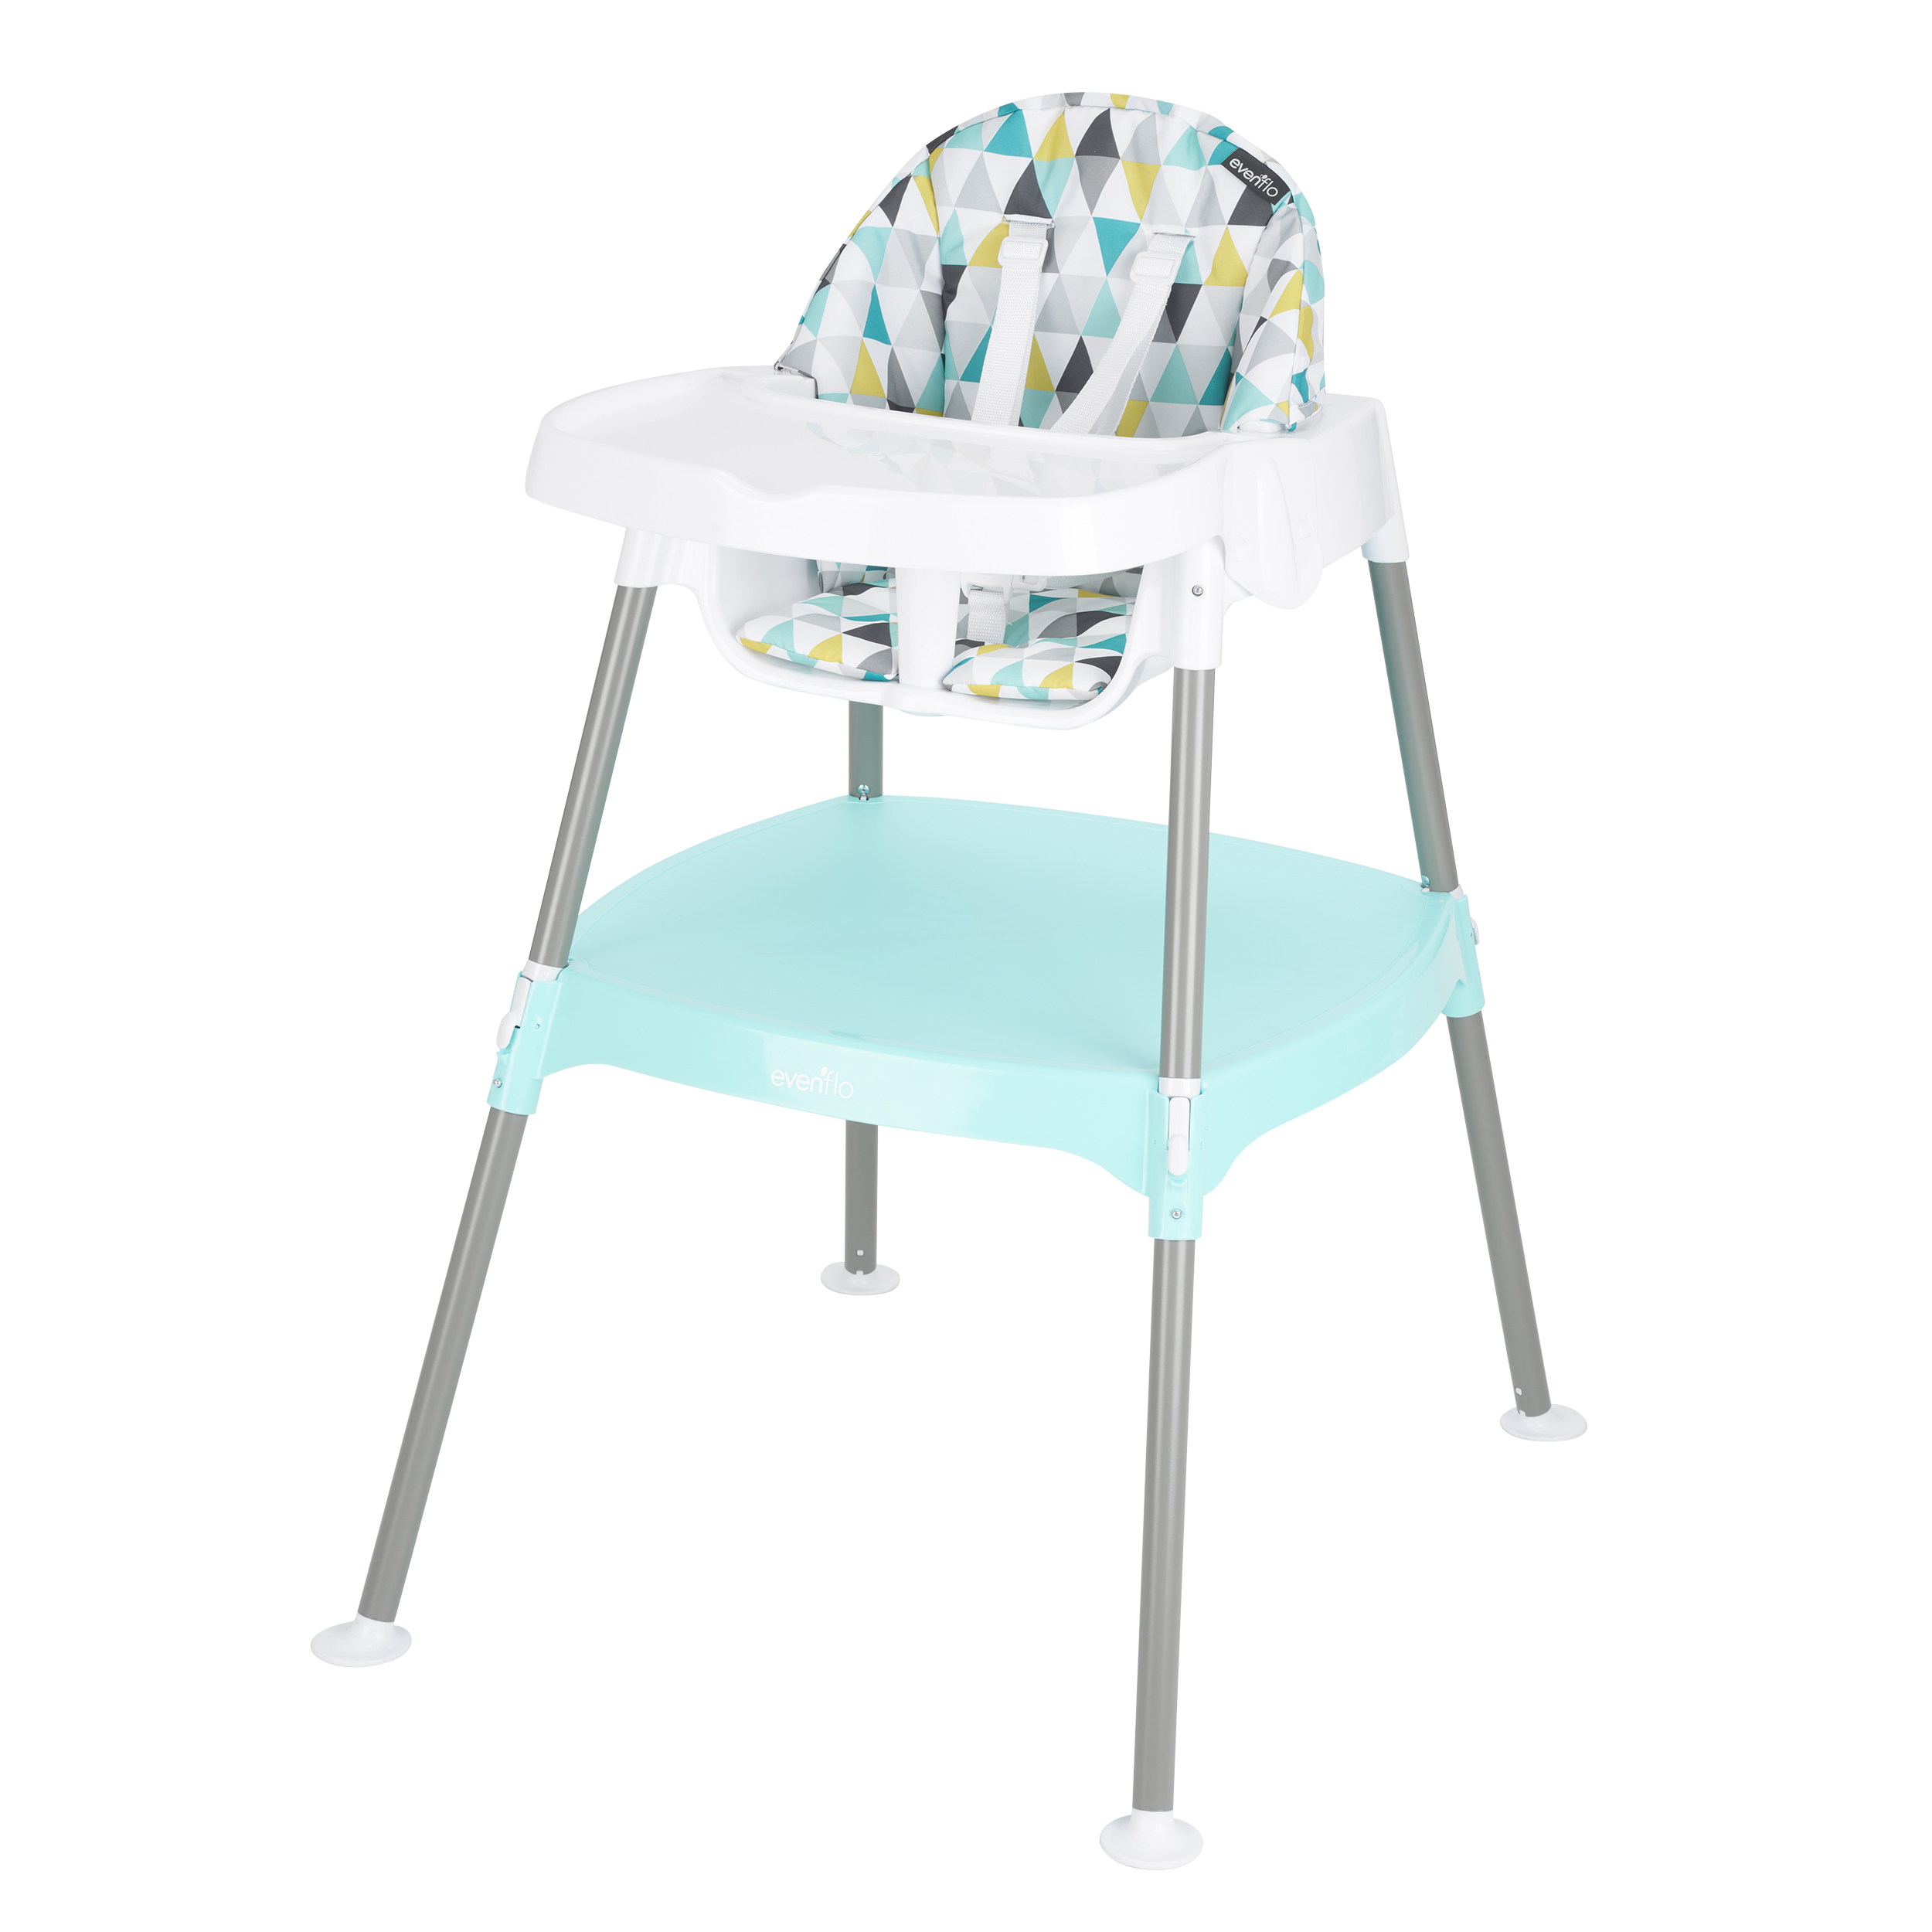 Evenflo-4-in-1-Eat-Grow-Convertible-High-Chair-Prism-Triangles